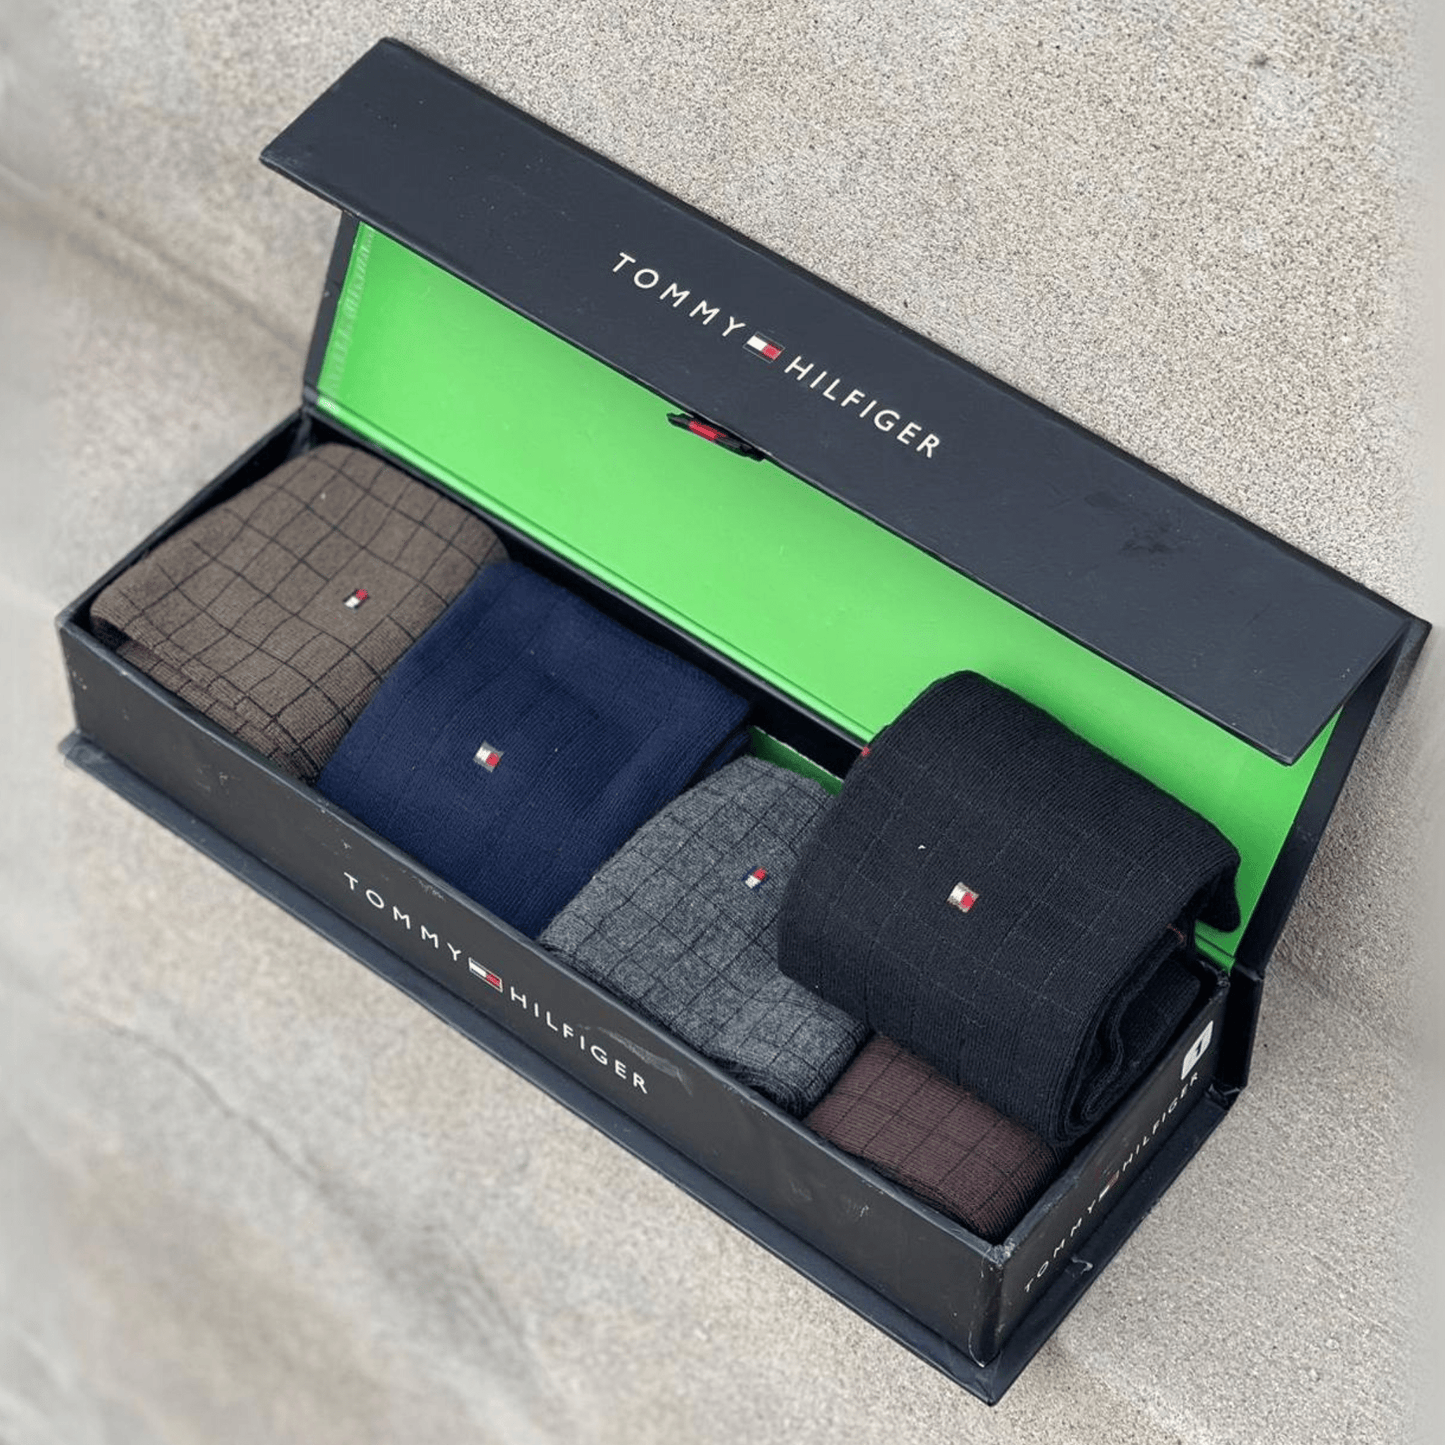 TM(Tommy Hilfiger) Brand 5 Colors Socks for Men with Premium Gift Packing Export Quality